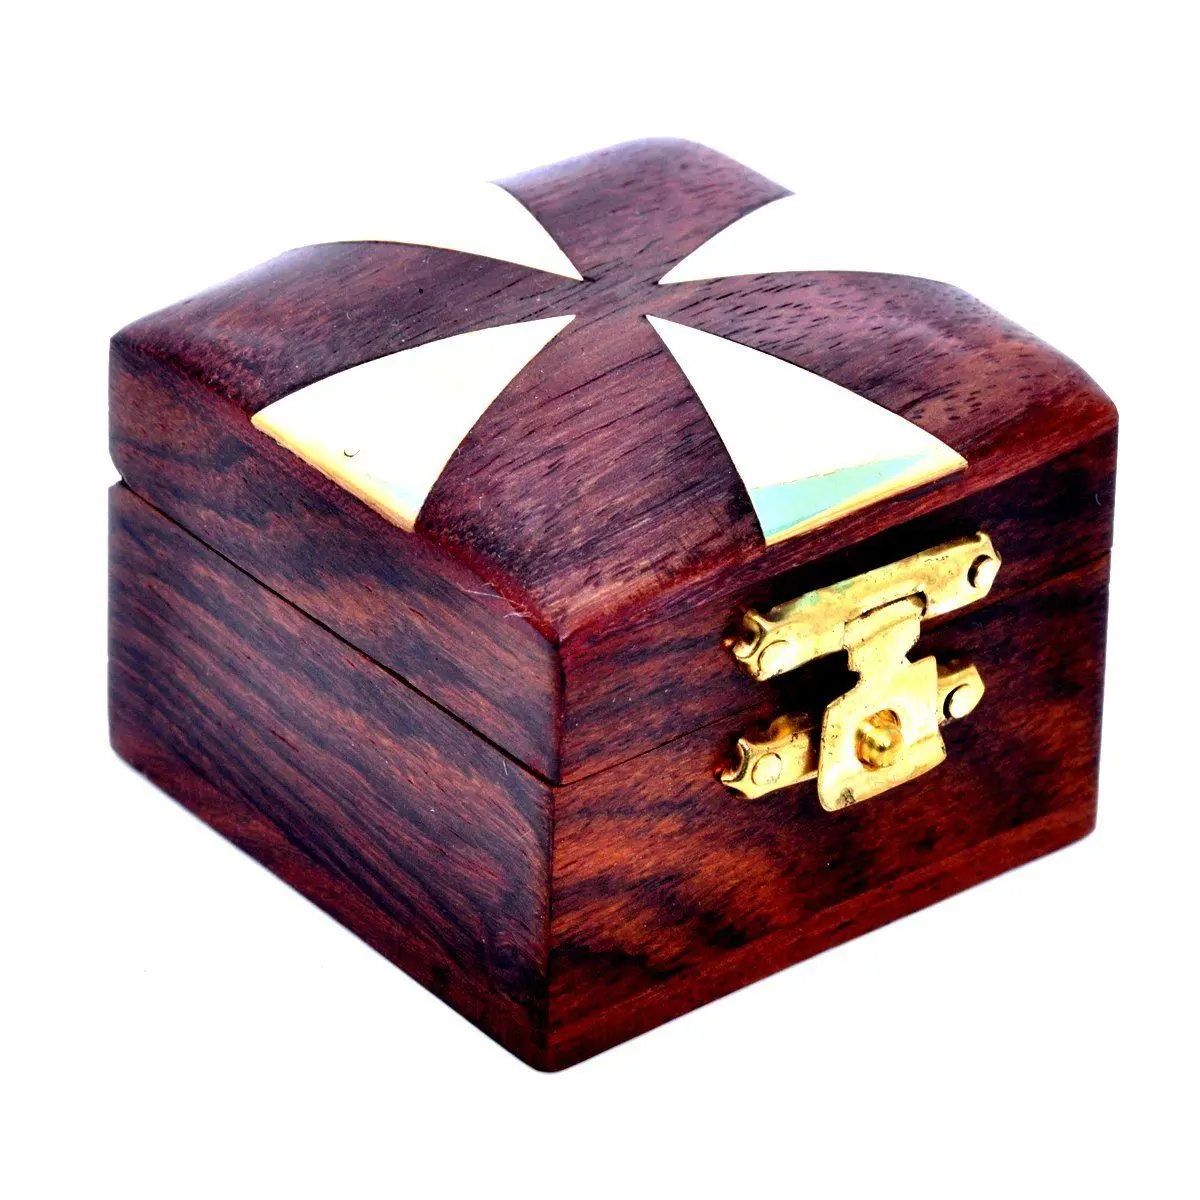 Luxury Wooden New Jewelry Box With Brass Work Best Quality Wooden Jewelry Box Hand Crafted Wooden Jewelry Box Brass Work By